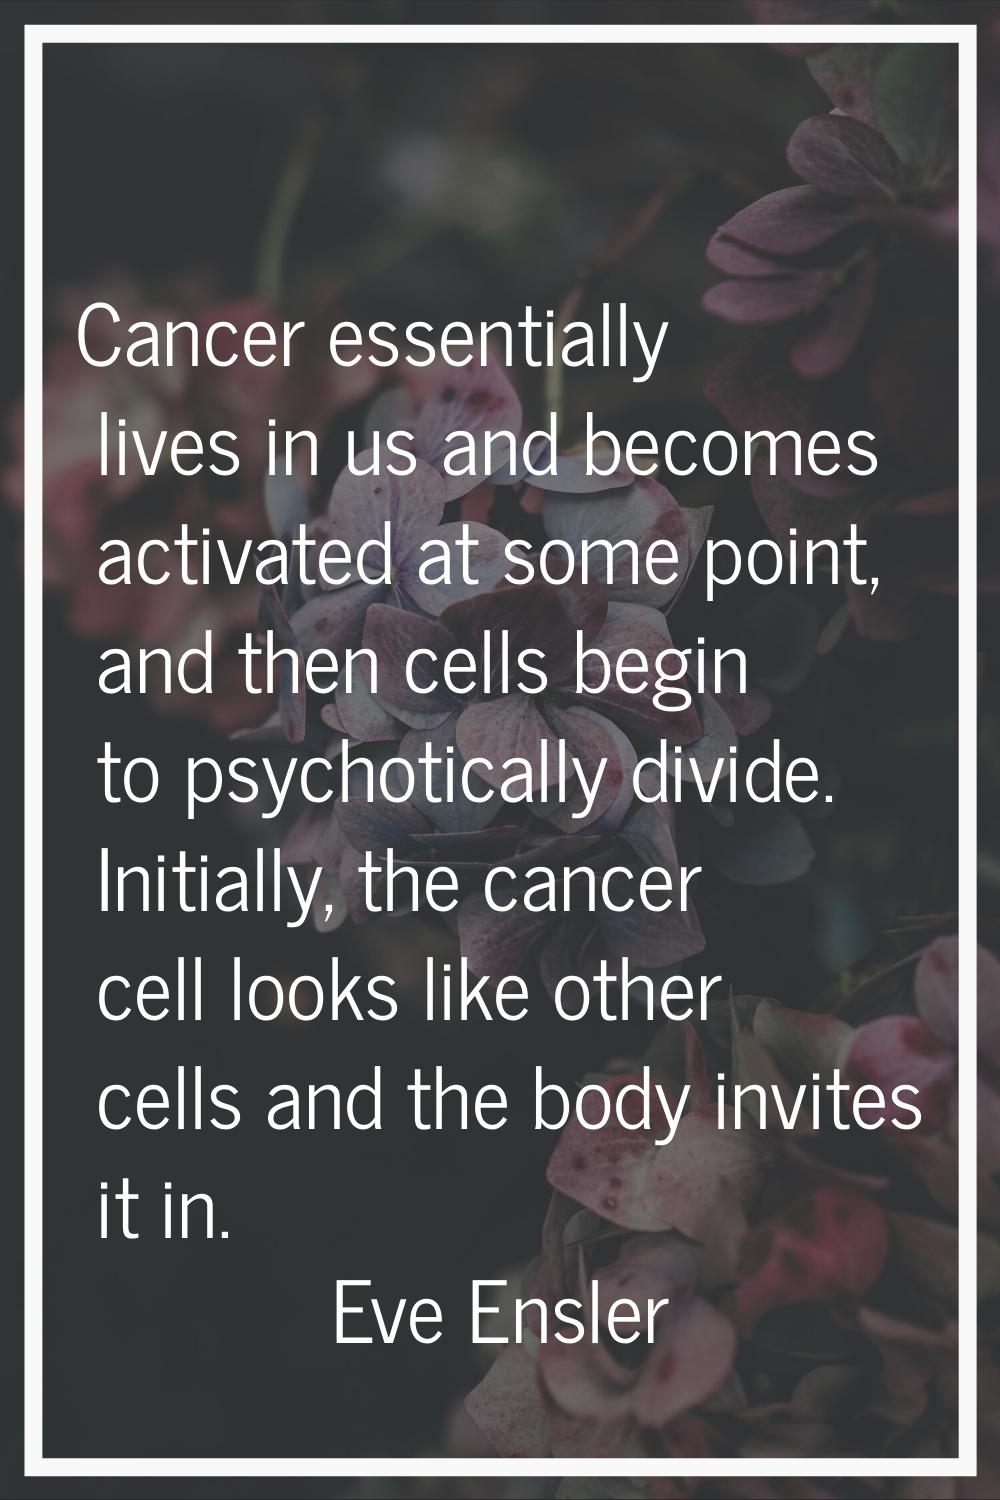 Cancer essentially lives in us and becomes activated at some point, and then cells begin to psychot